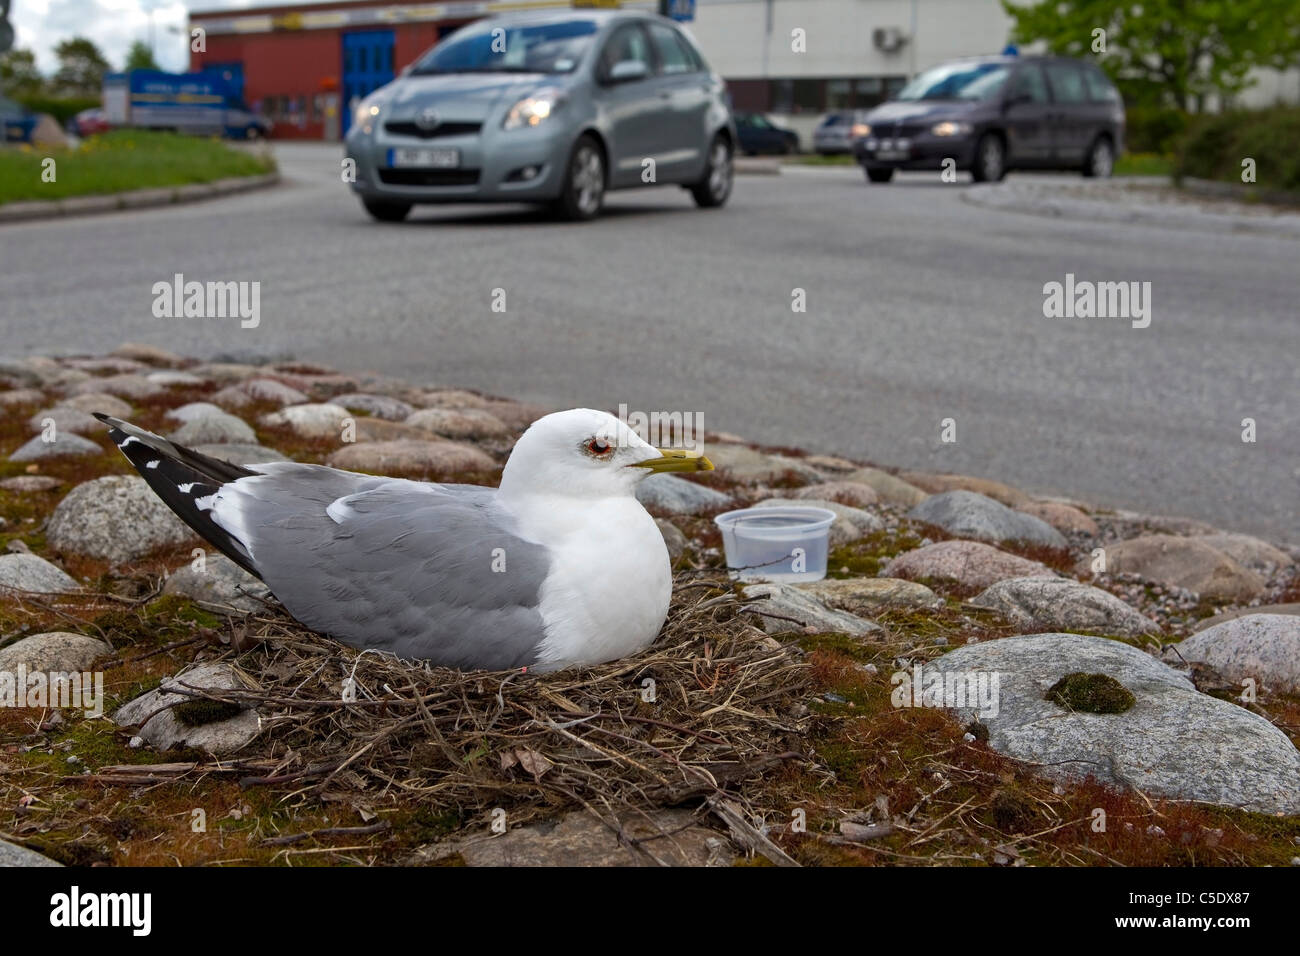 Close-up side shot of a seagull in nest by urban road Stock Photo